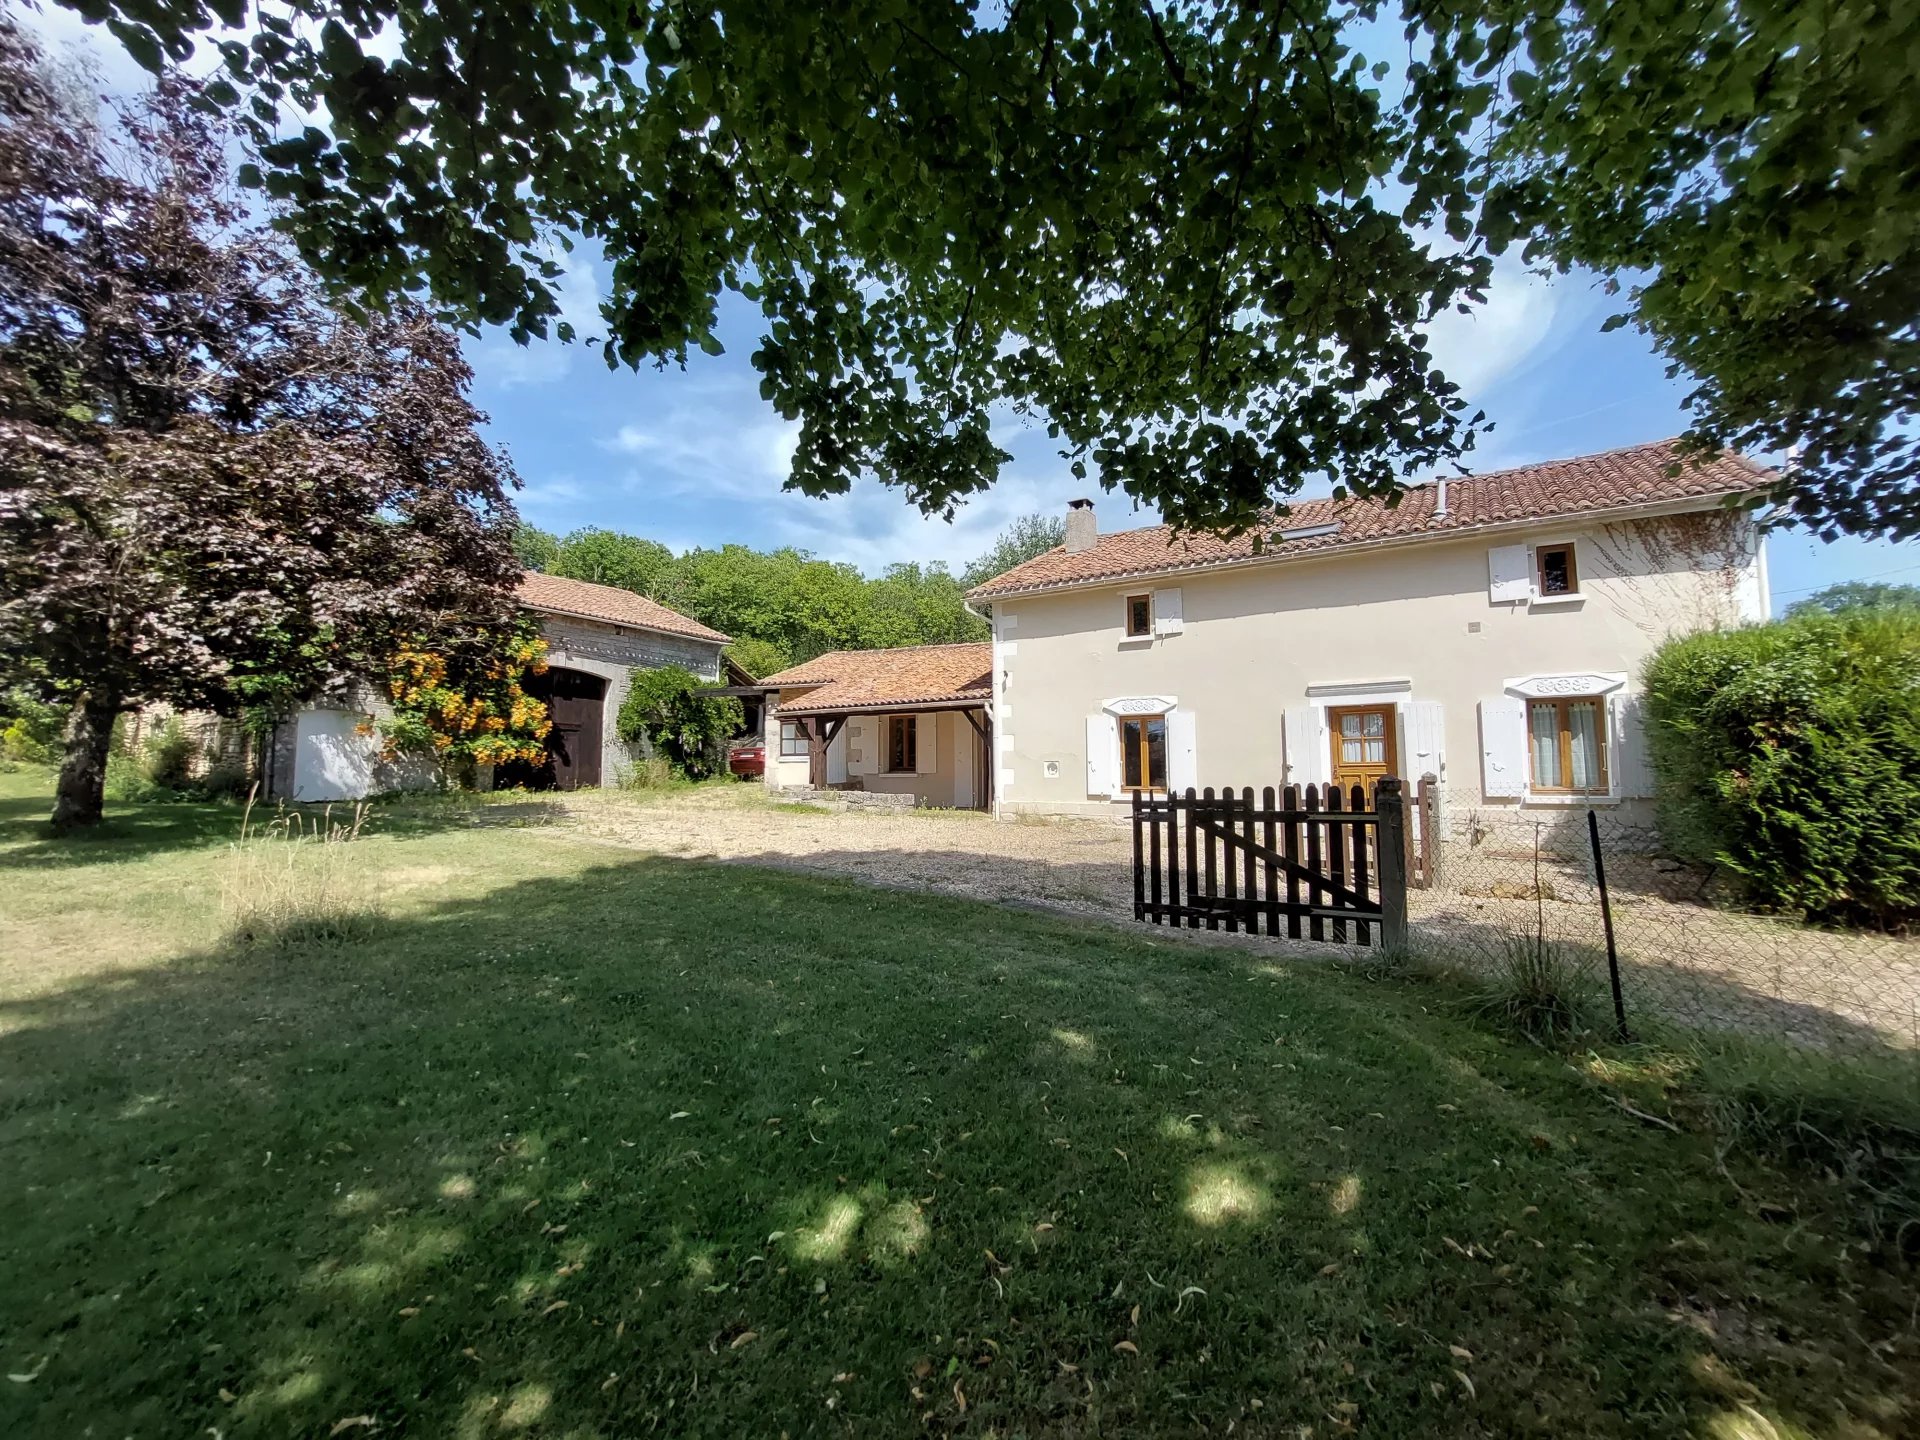 Gorgeous 4-bed country home with pool, barn, large garden and some woodland too